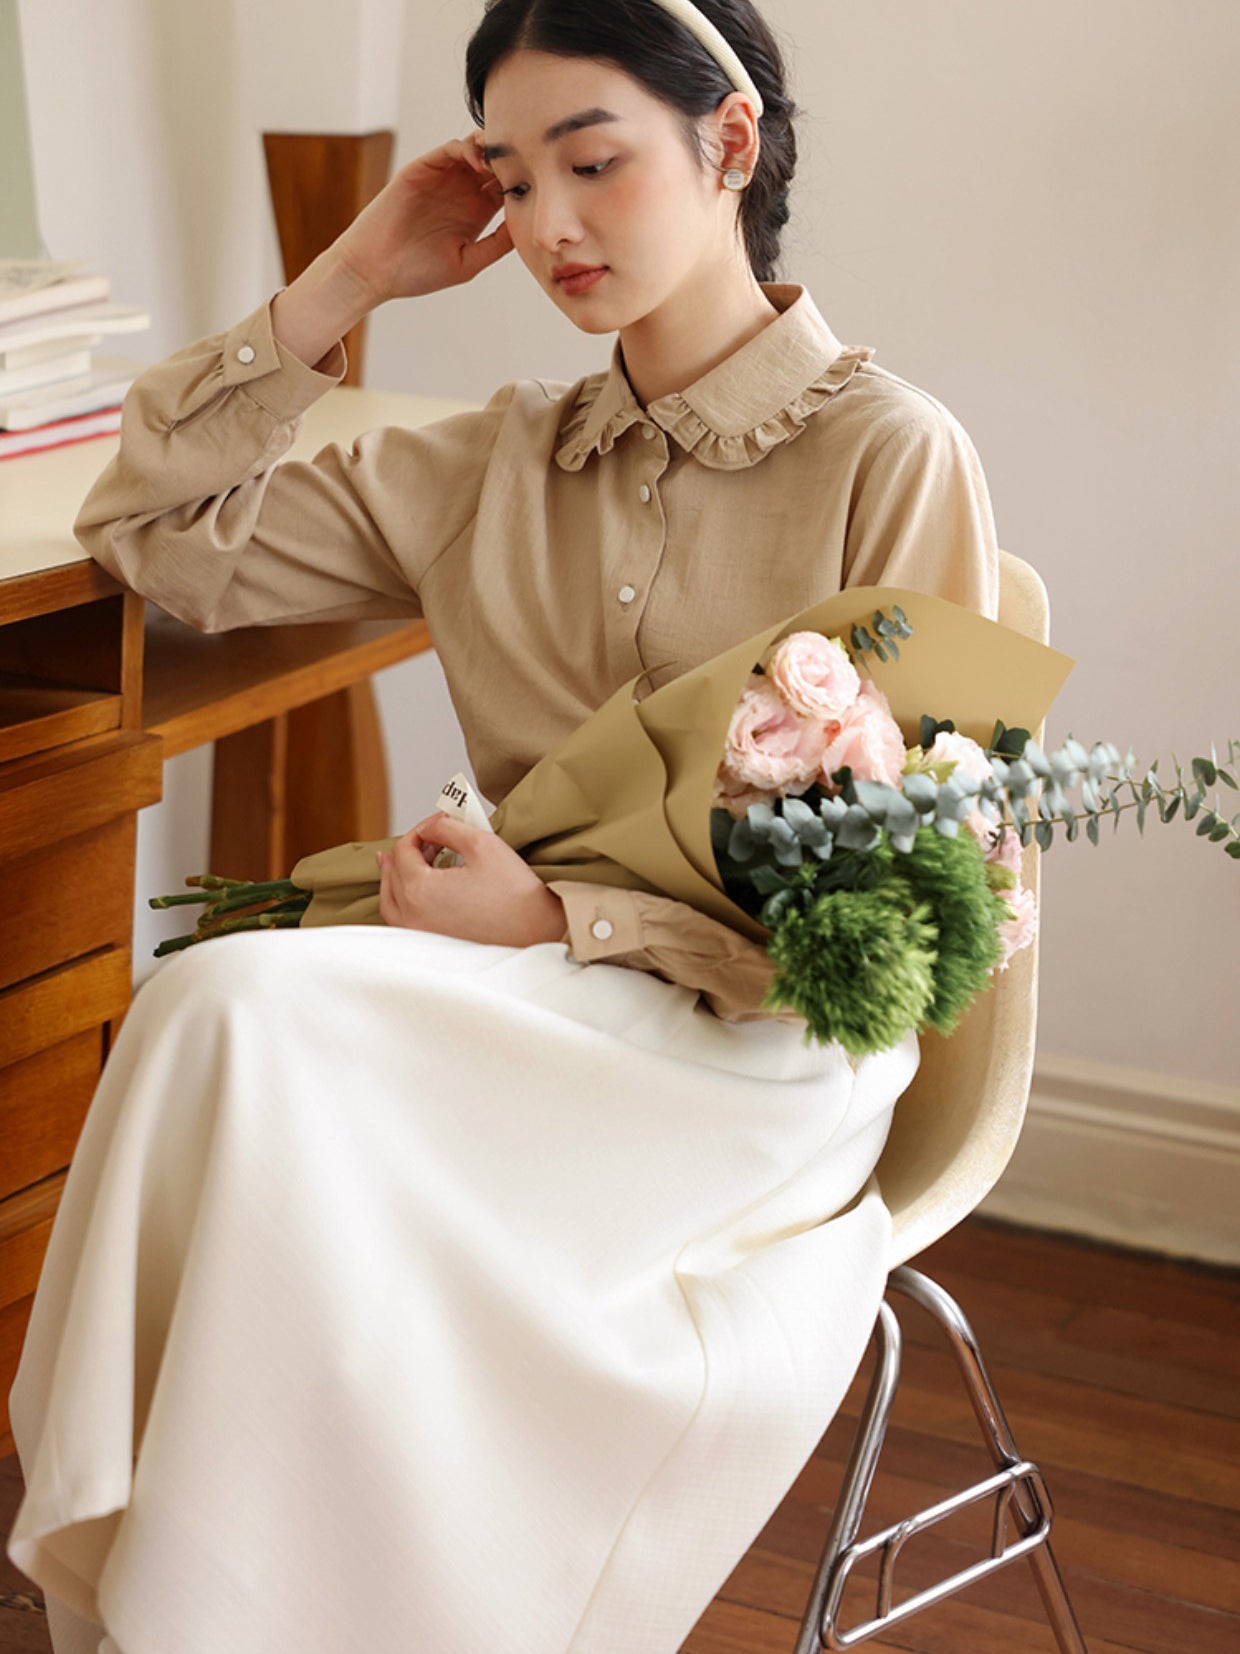 Apricot-colored lady's pleated skirt